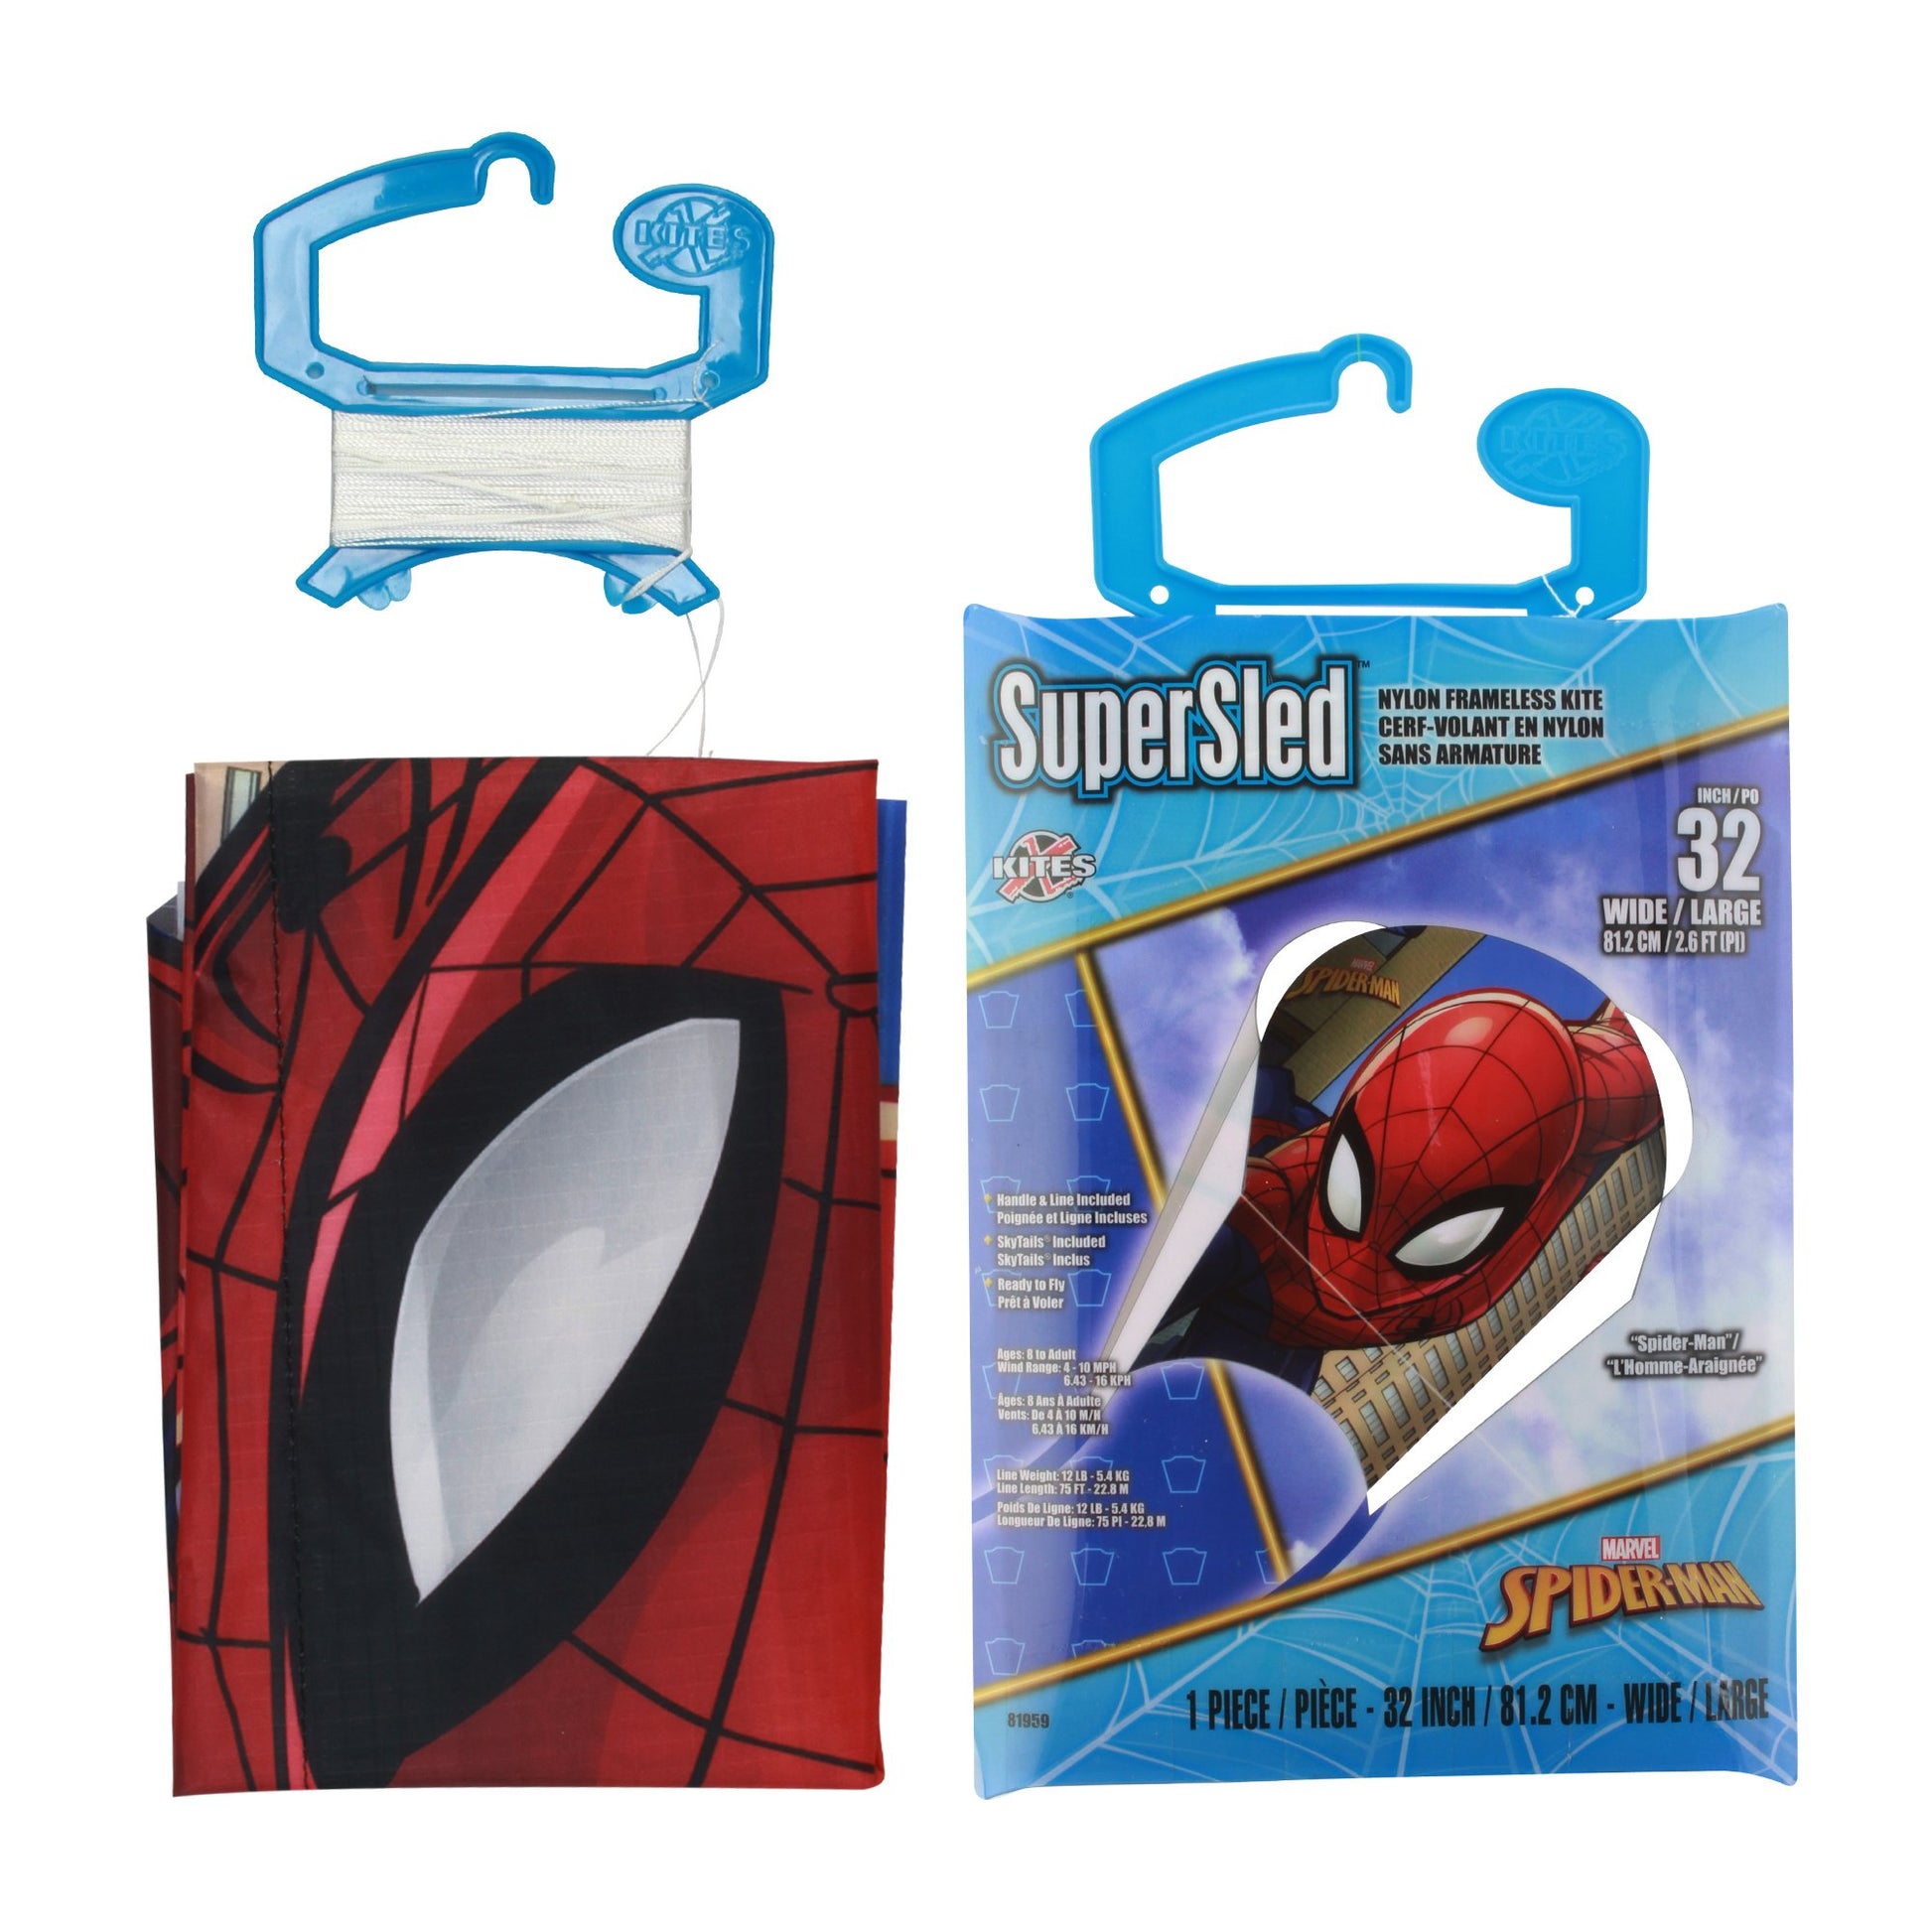 X Kites SuperSled Spider-Man Nylon Kite packaging and contents